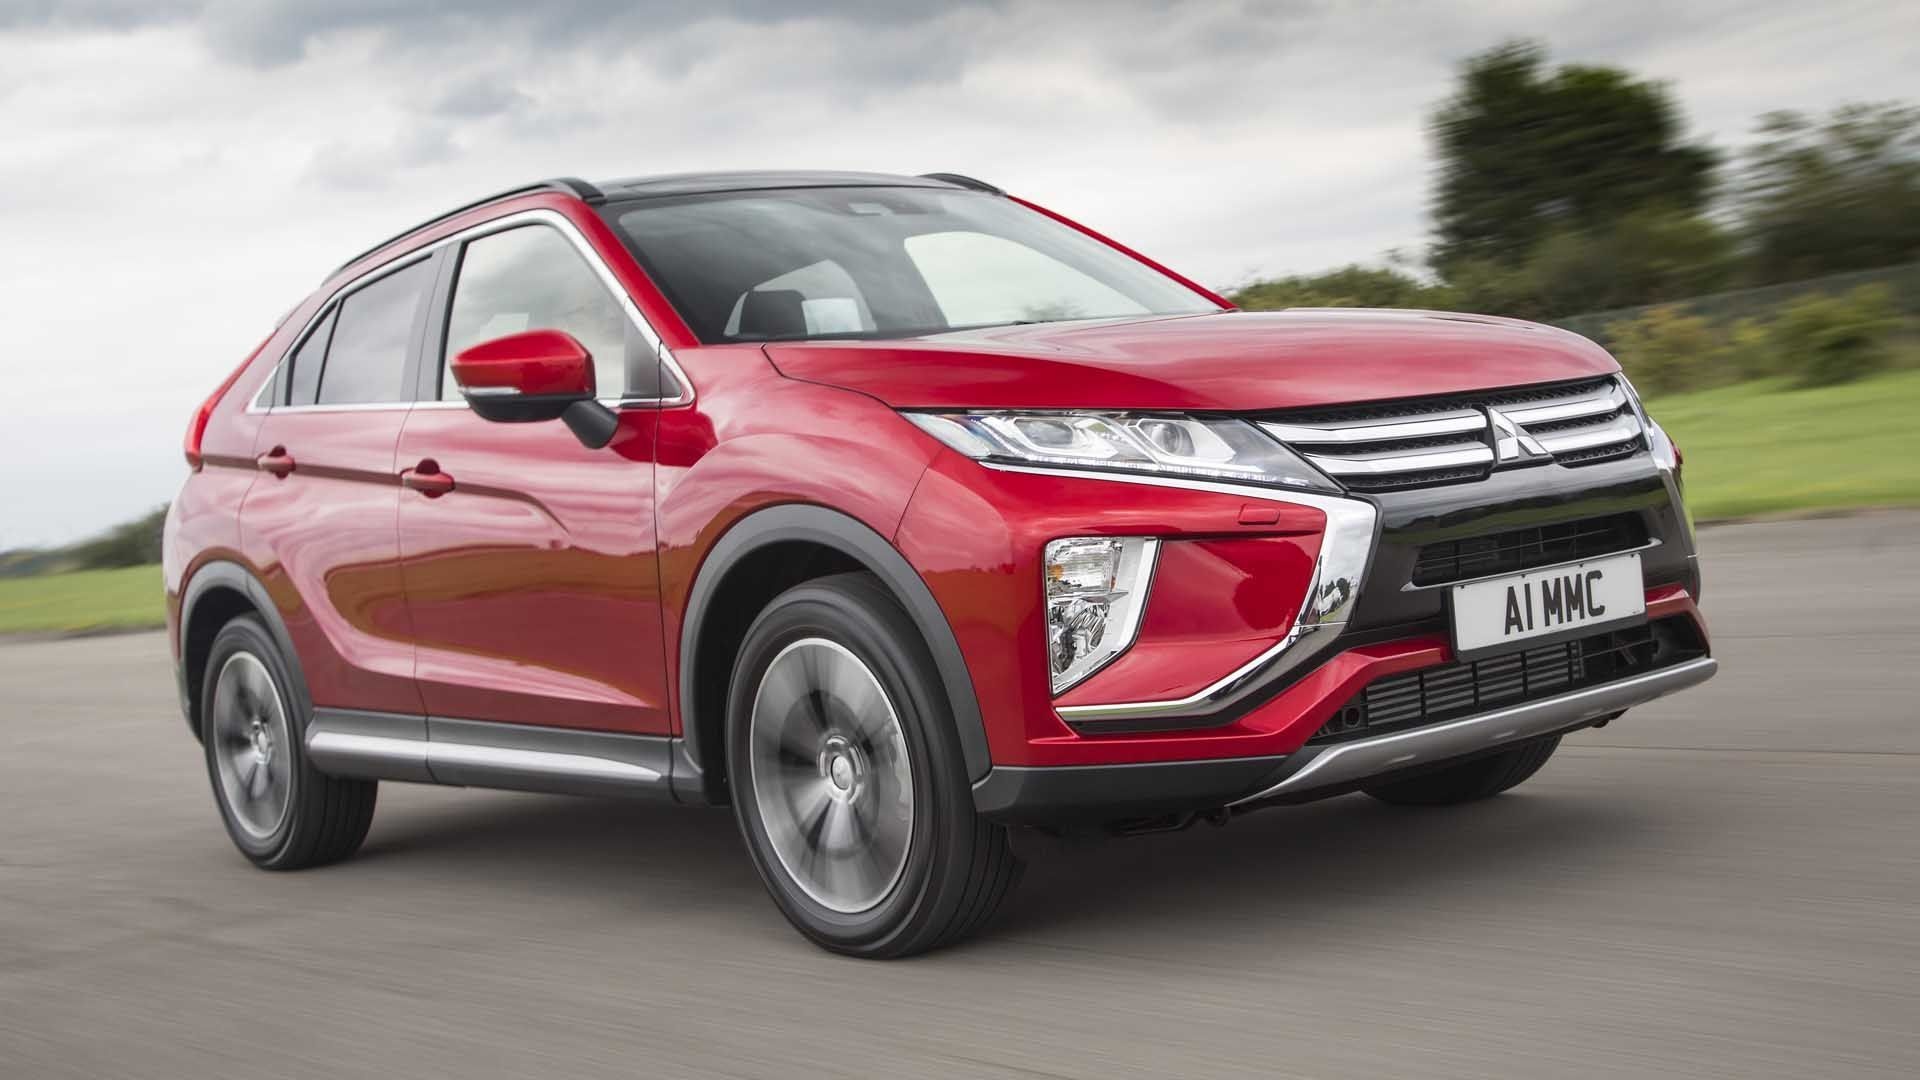 Mitsubishi Eclipse Cross, Used cars for sale, Reliable options, Affordable prices, 1920x1080 Full HD Desktop